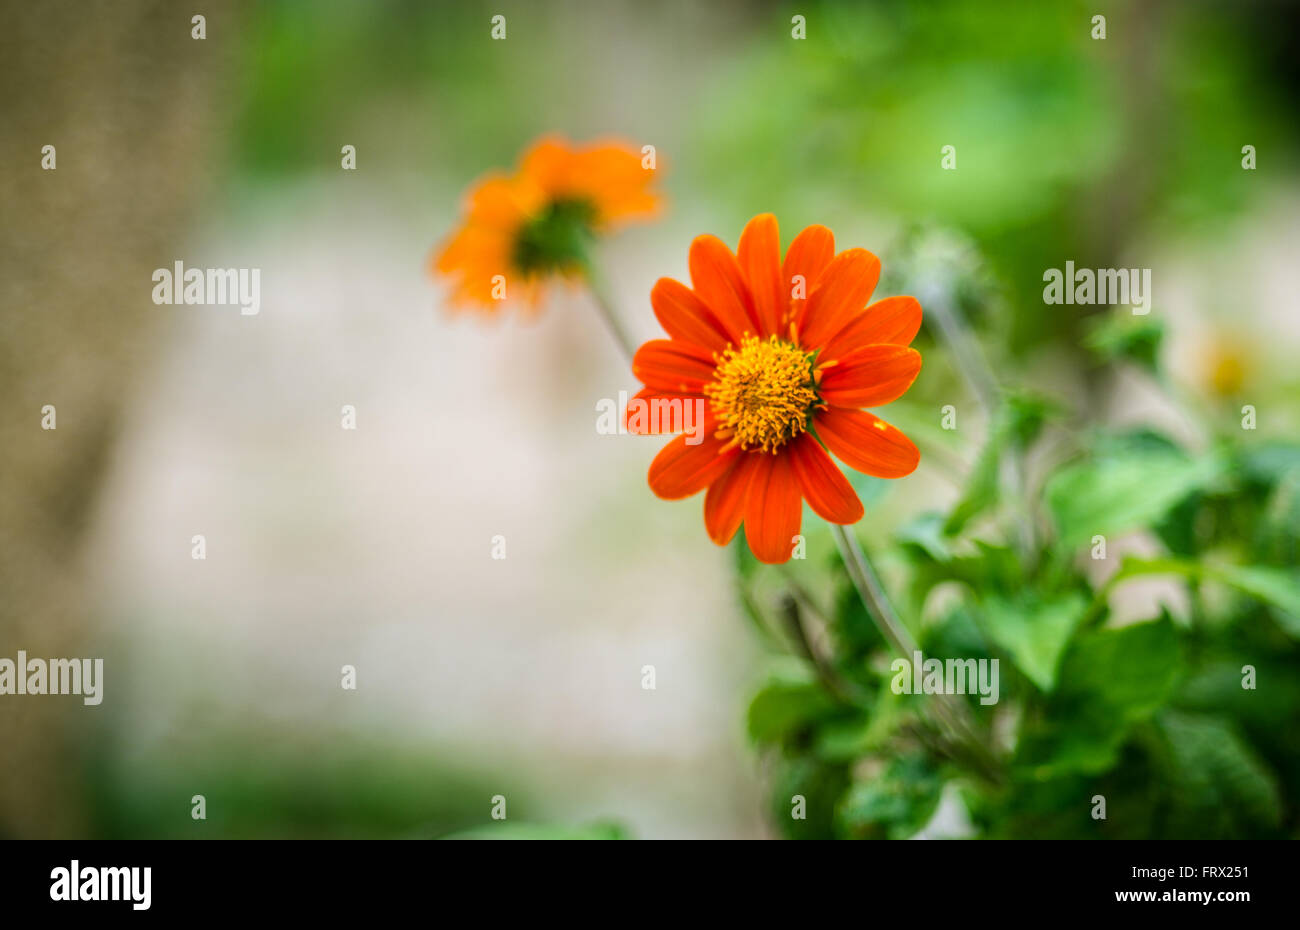 Abstract flower images. Stock Photo